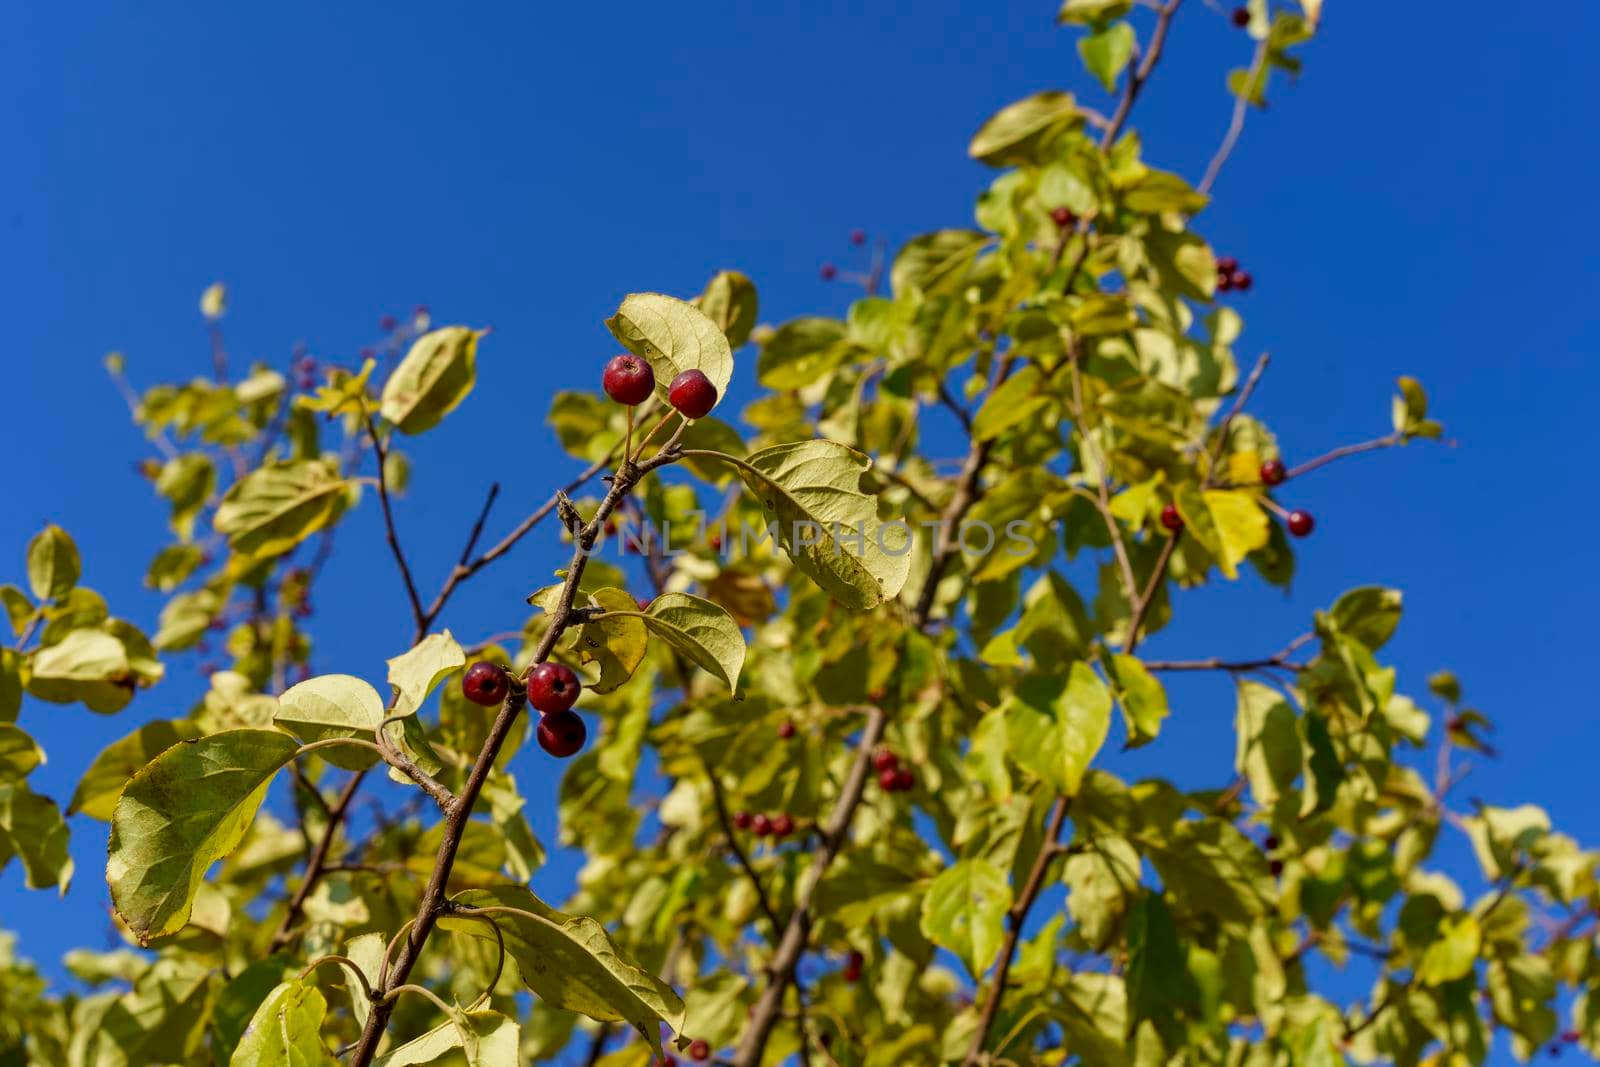 Branches of a wild apple tree with fruits on a blue sky background.